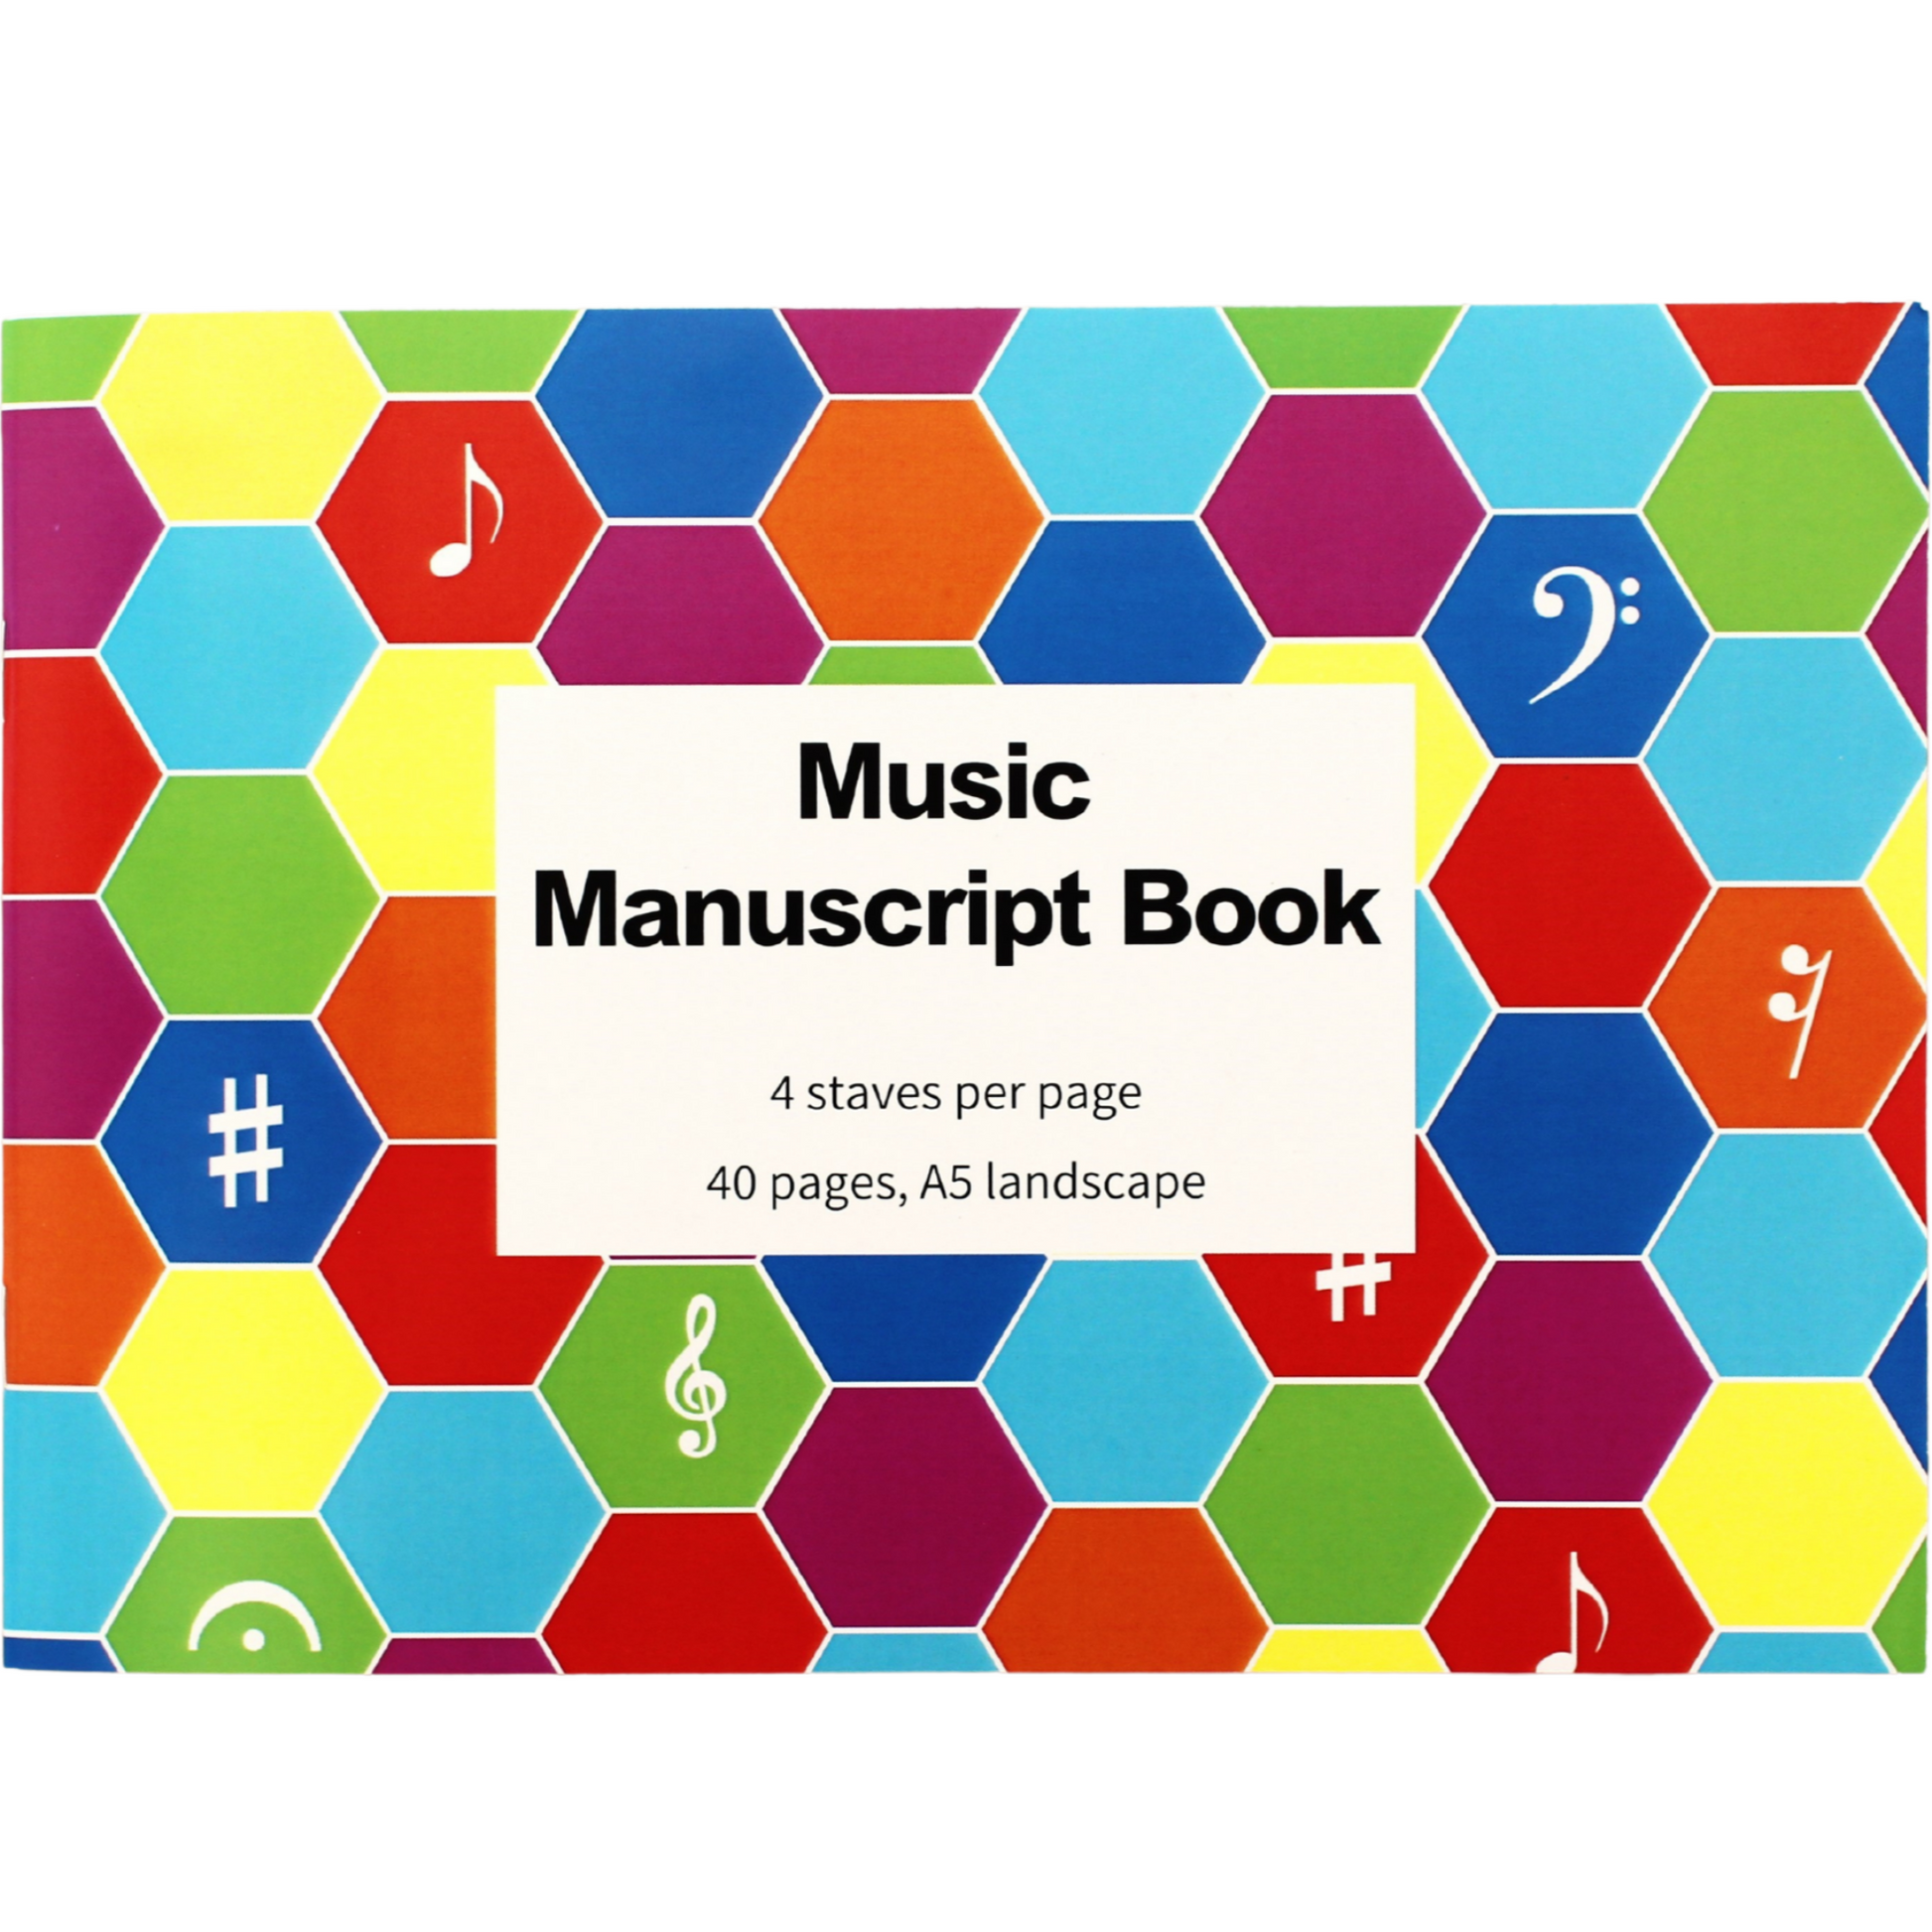 A5 Music manuscript book with a colourful cover, featuring a multicoloured hexagonal design with musical symbols.